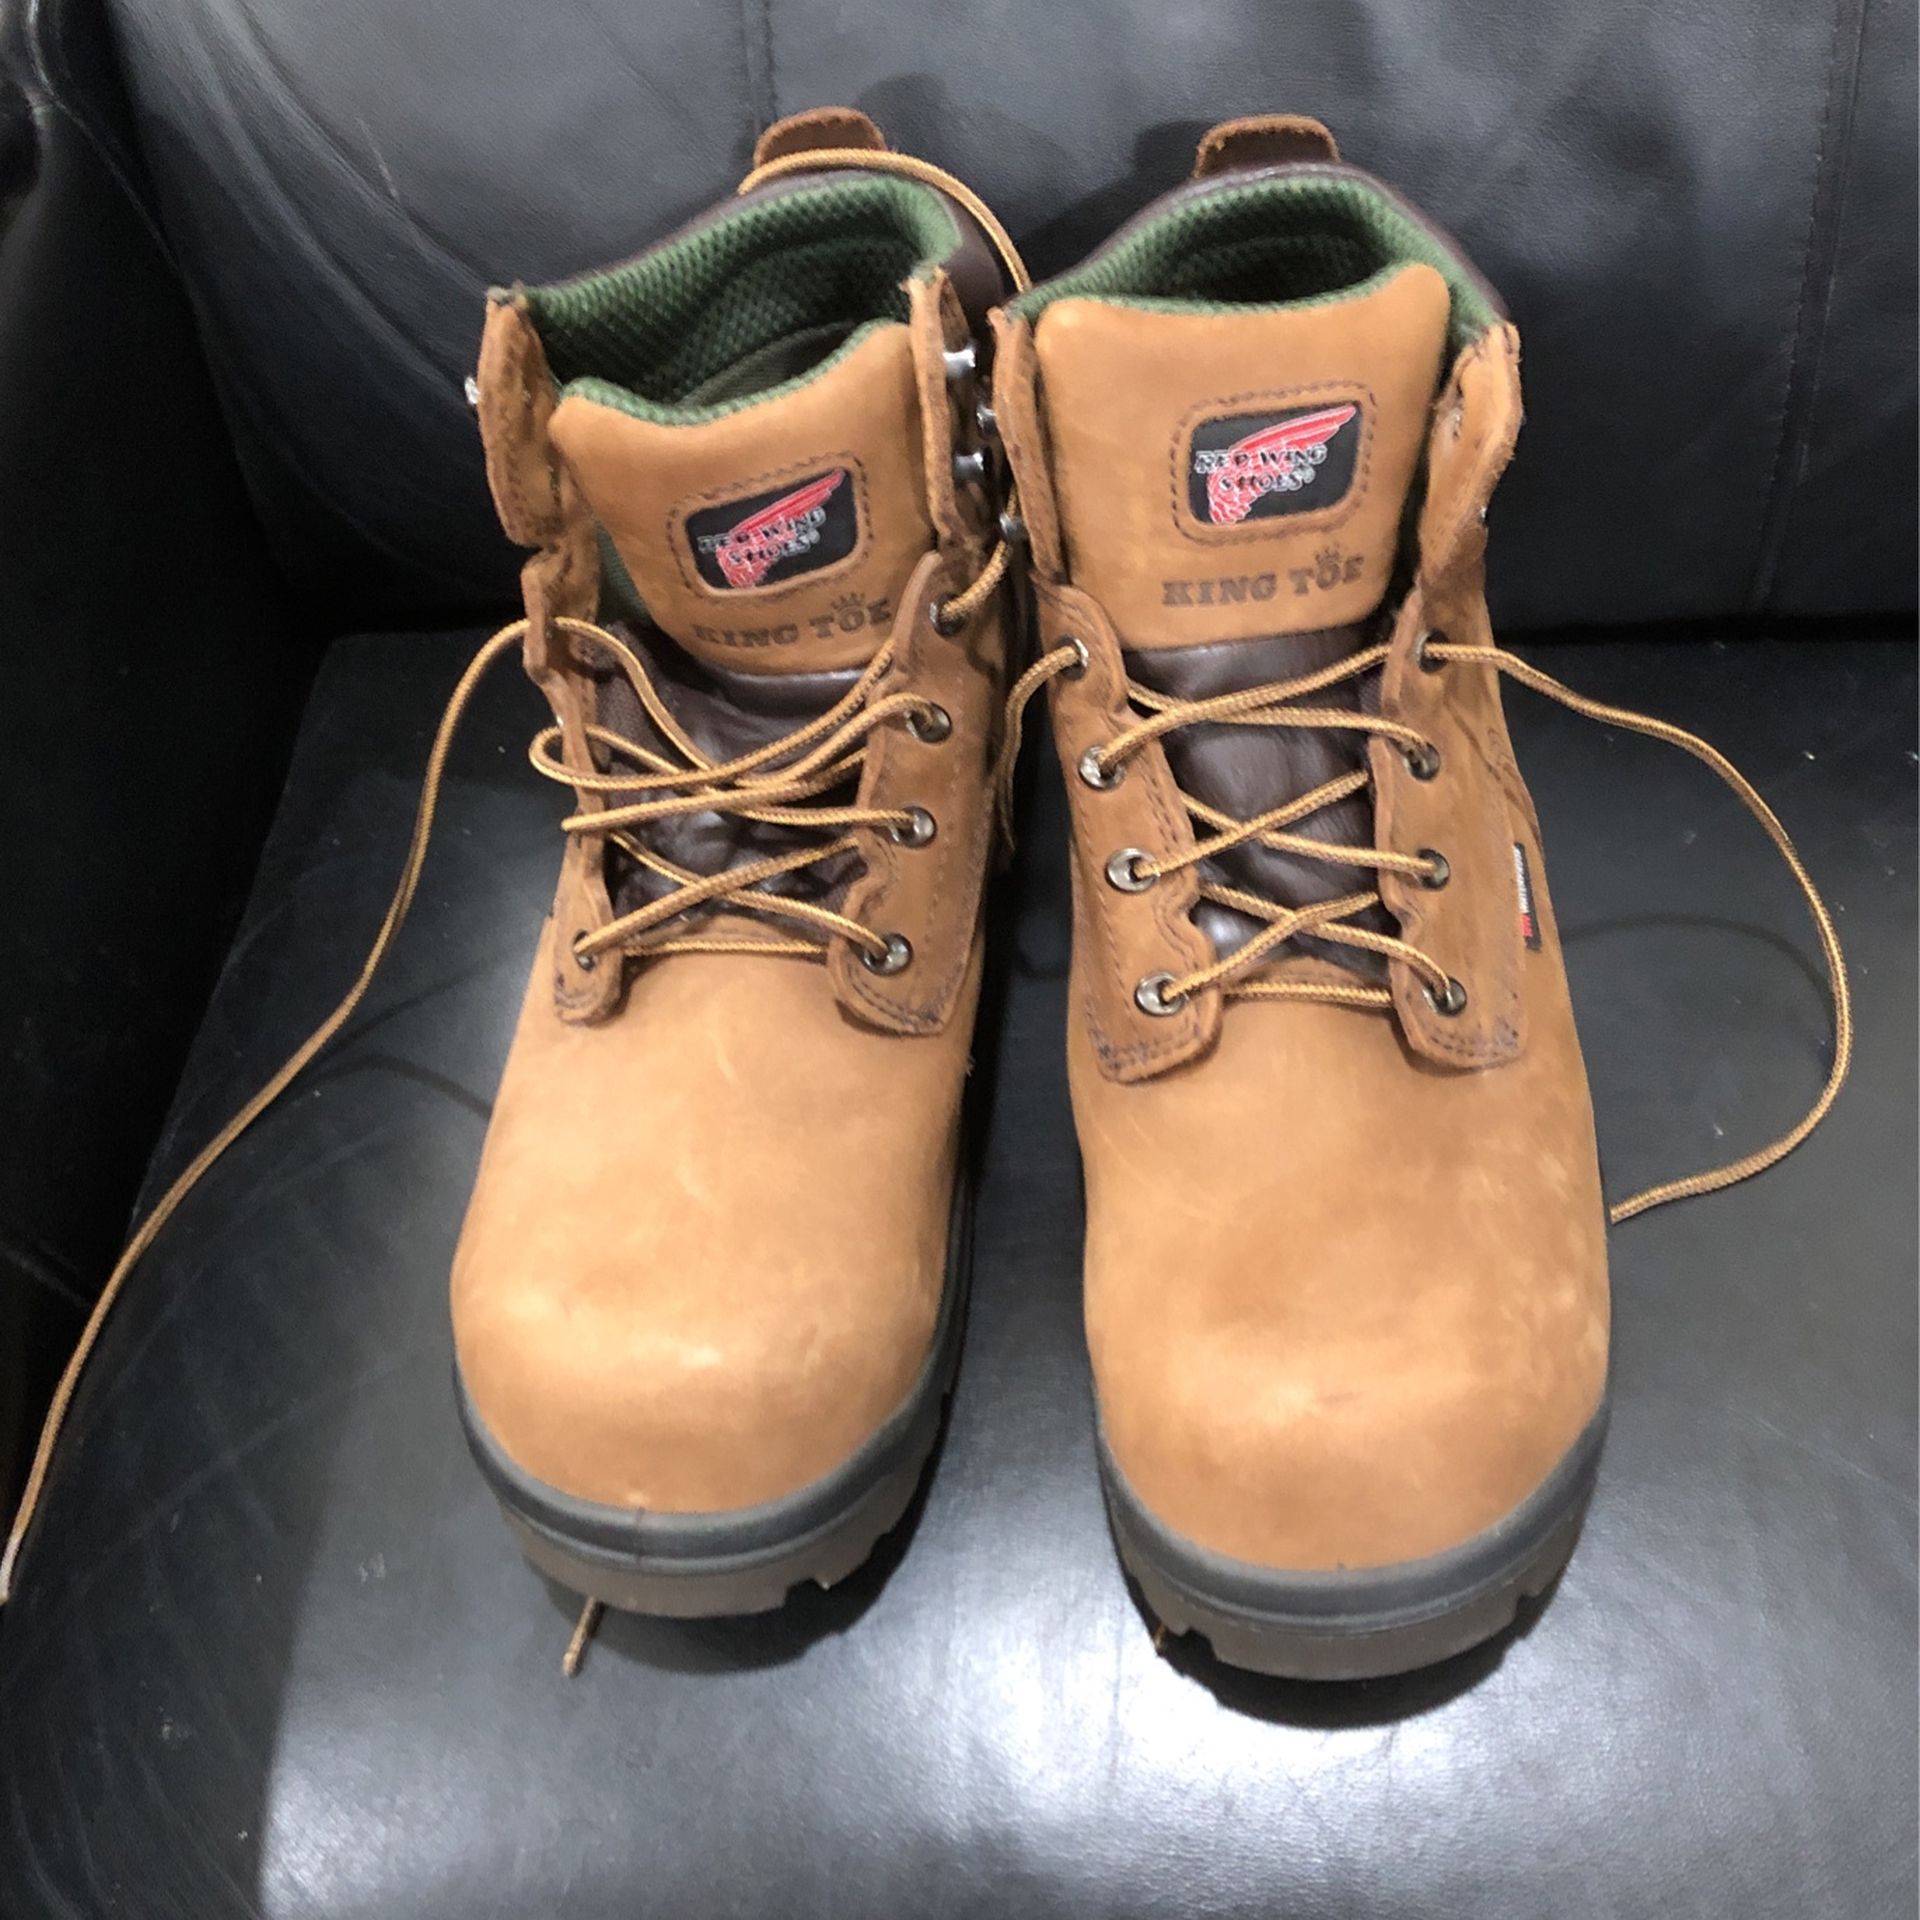 Red Wing Safety boots size 11 D